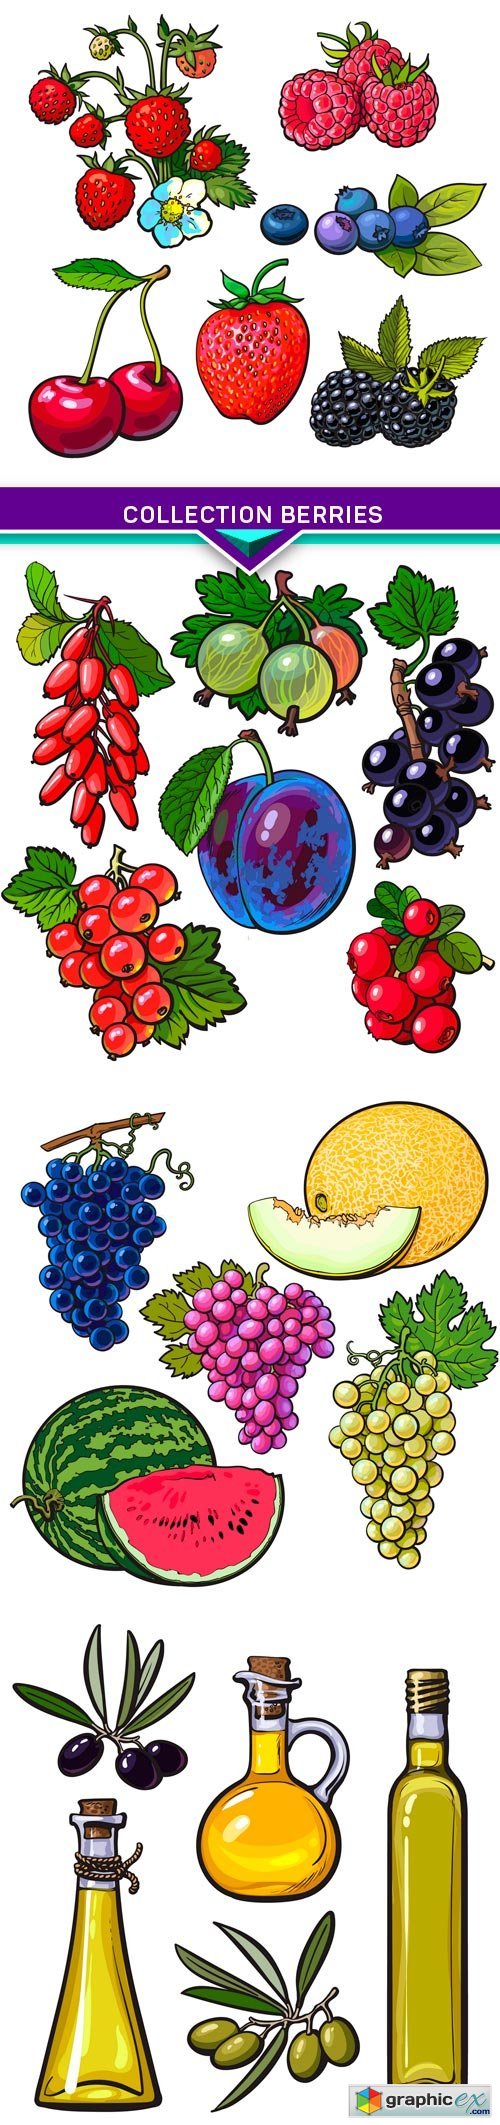 Collection berries, vector illustration isolated on white background 4X EPS